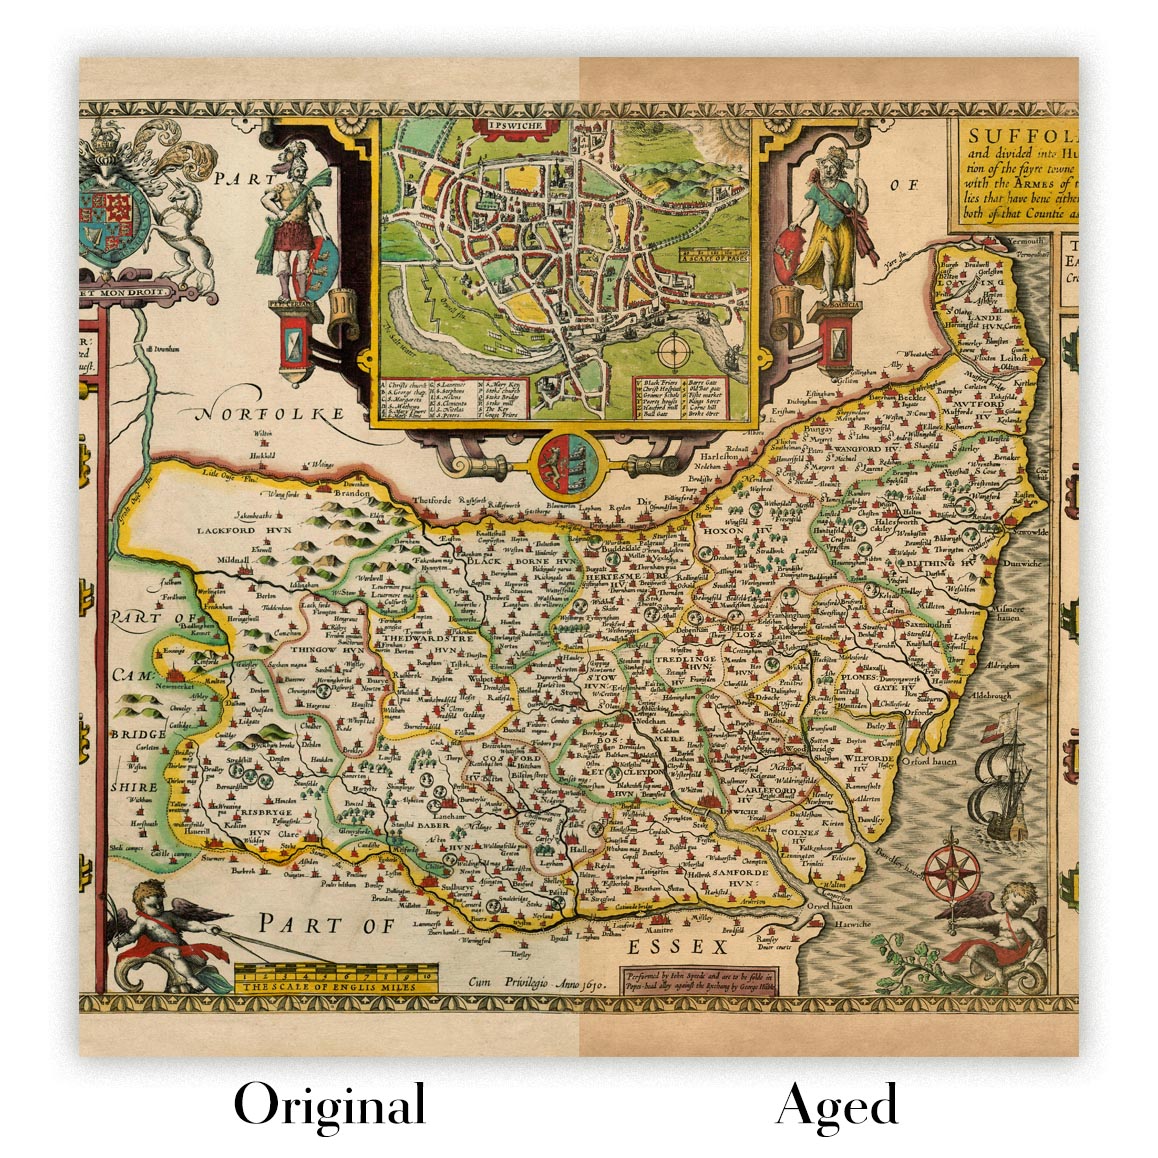 Image showing the difference between an Original map and an Aged toned map